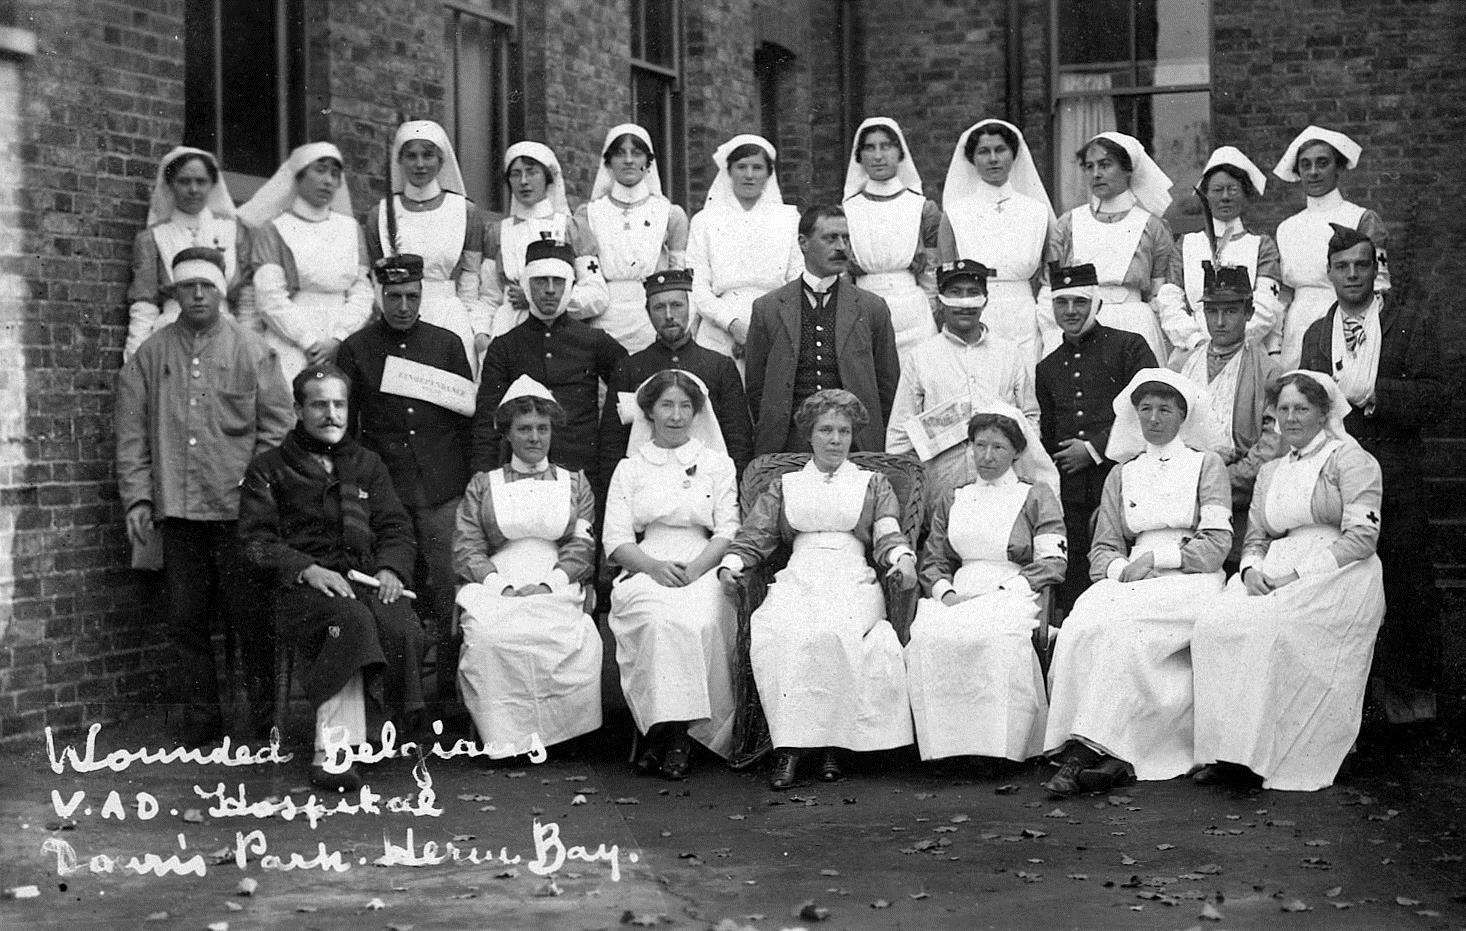 Some of the wounded VAD nurses with wounded Belgian soldiers. Nurse Lloyd is probably among them